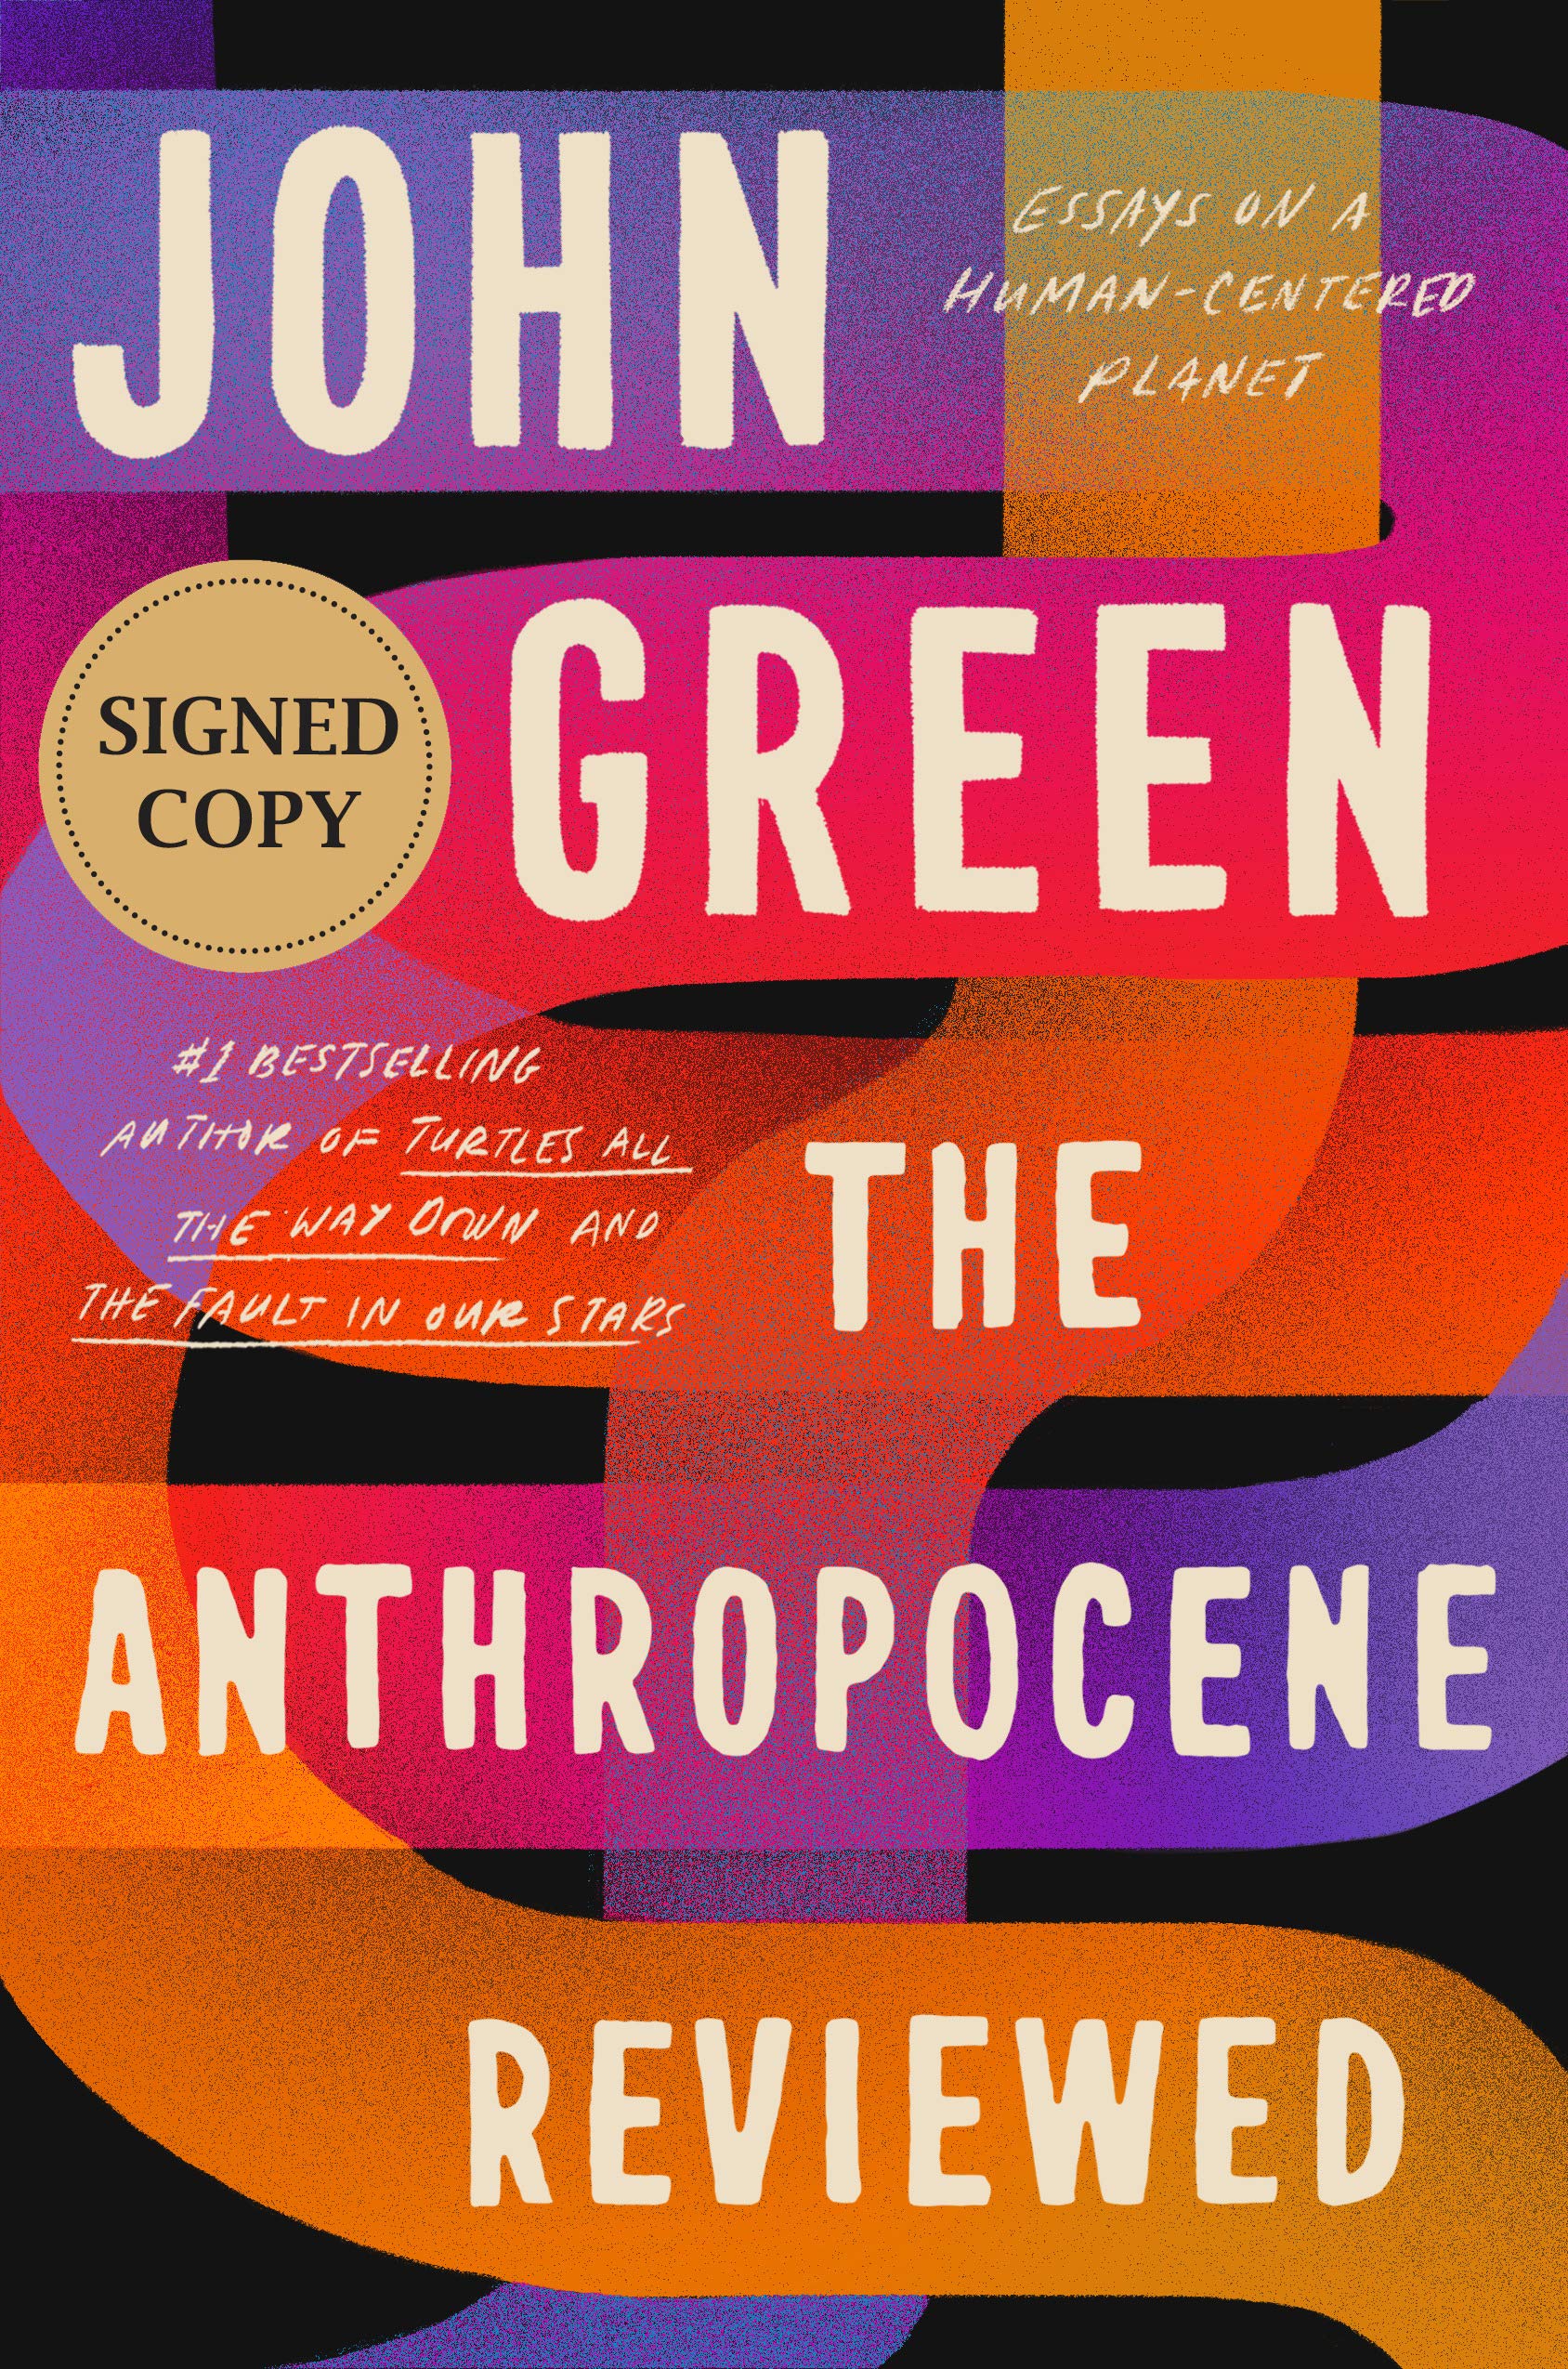 Limited Signed Edition - The Anthropocene Reviewed